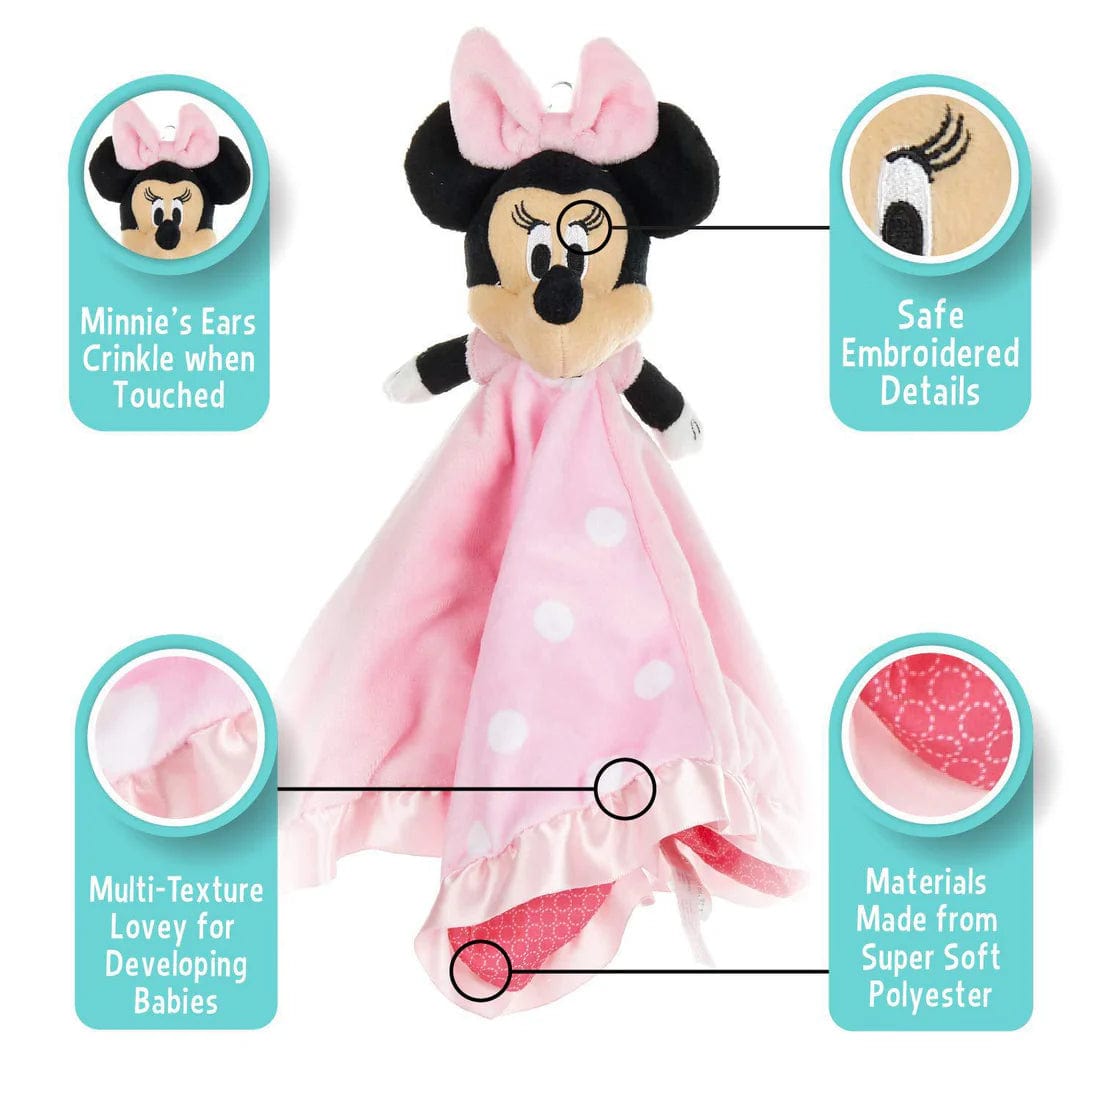 Kids Preferred Kids Preferred Disney Baby Minnie Mouse Snuggle Blanky - Little Miss Muffin Children & Home